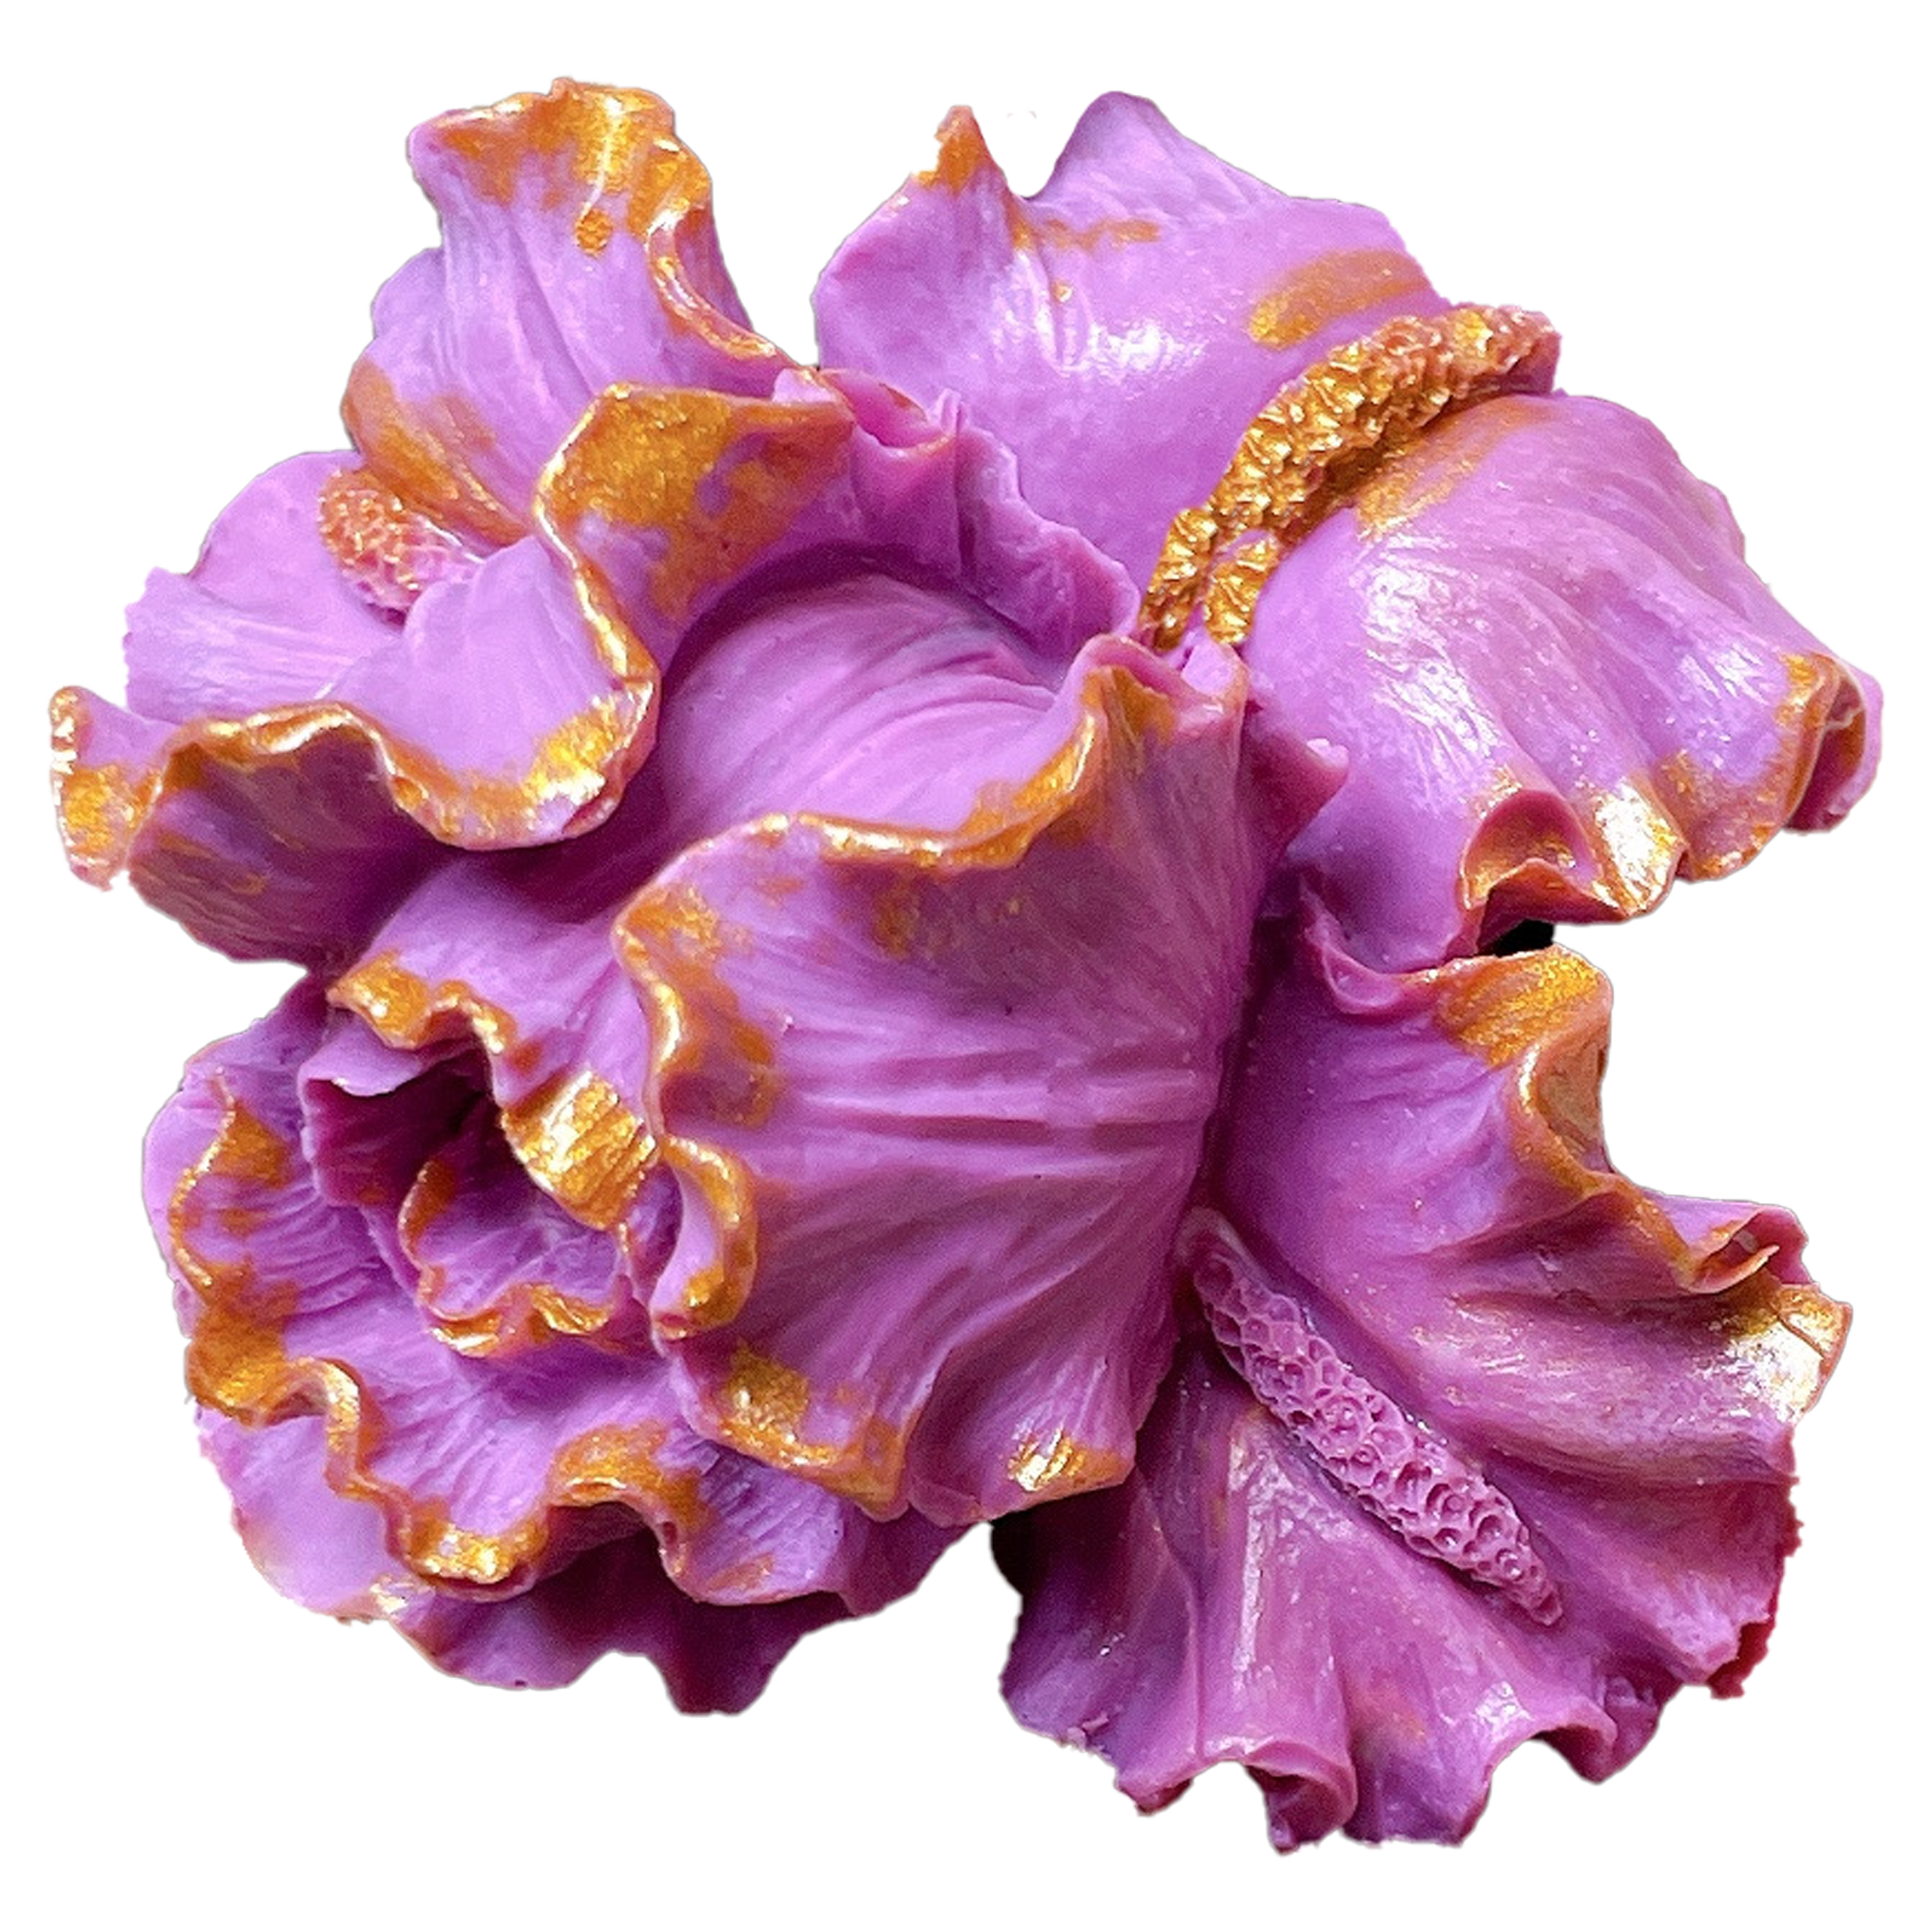 3D Purple Chocolate Flower Orchid is a handcrafted art piece. This flower is made of tinted White Chocolate and filled with marshmallows and dried fruits/berries.